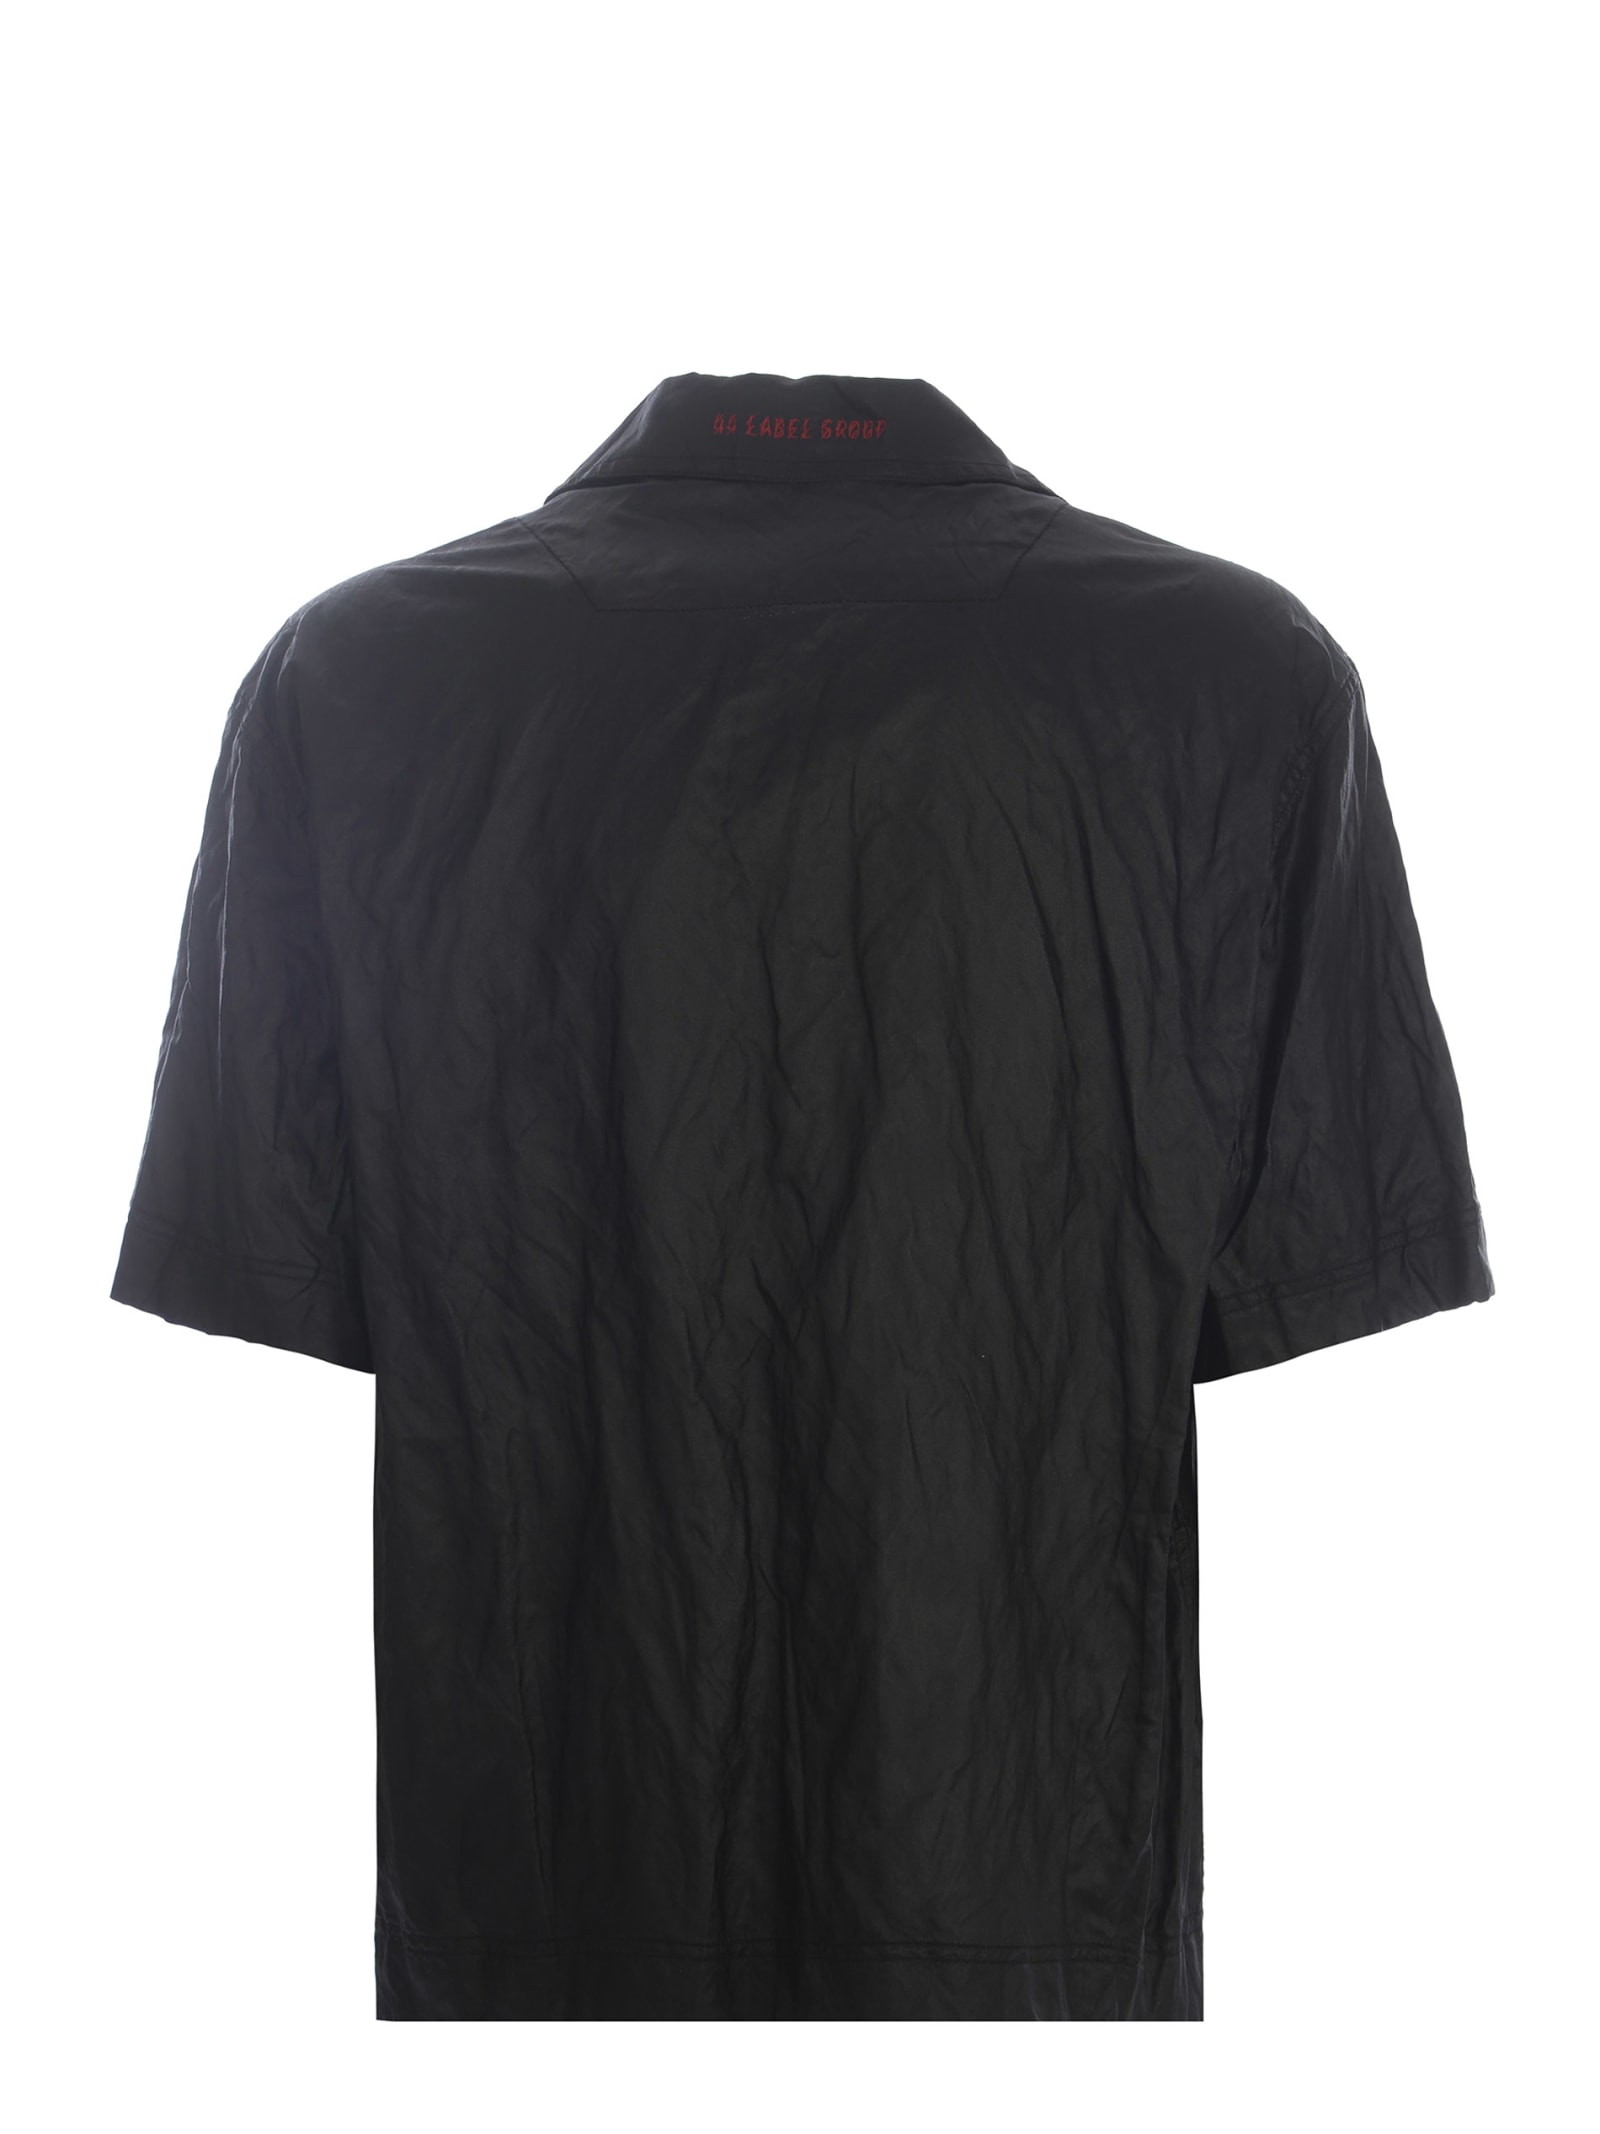 Shop 44 Label Group Bowling Shirt 44label Group Made Of Viscose In Nero